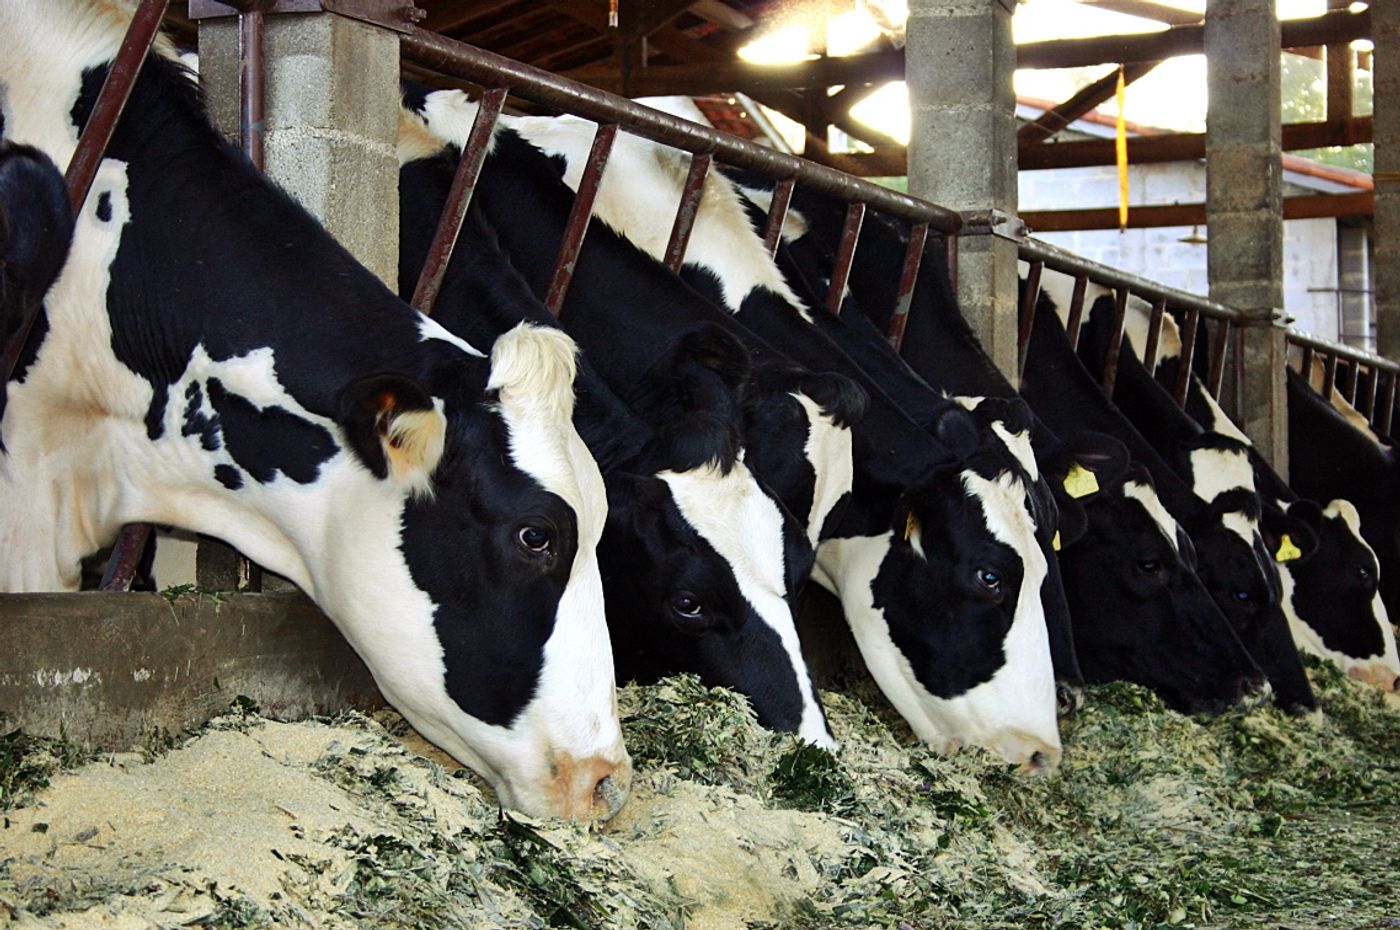 Cattle feed is a hot topic in the agriculture industry. Photo: Farmahygiene